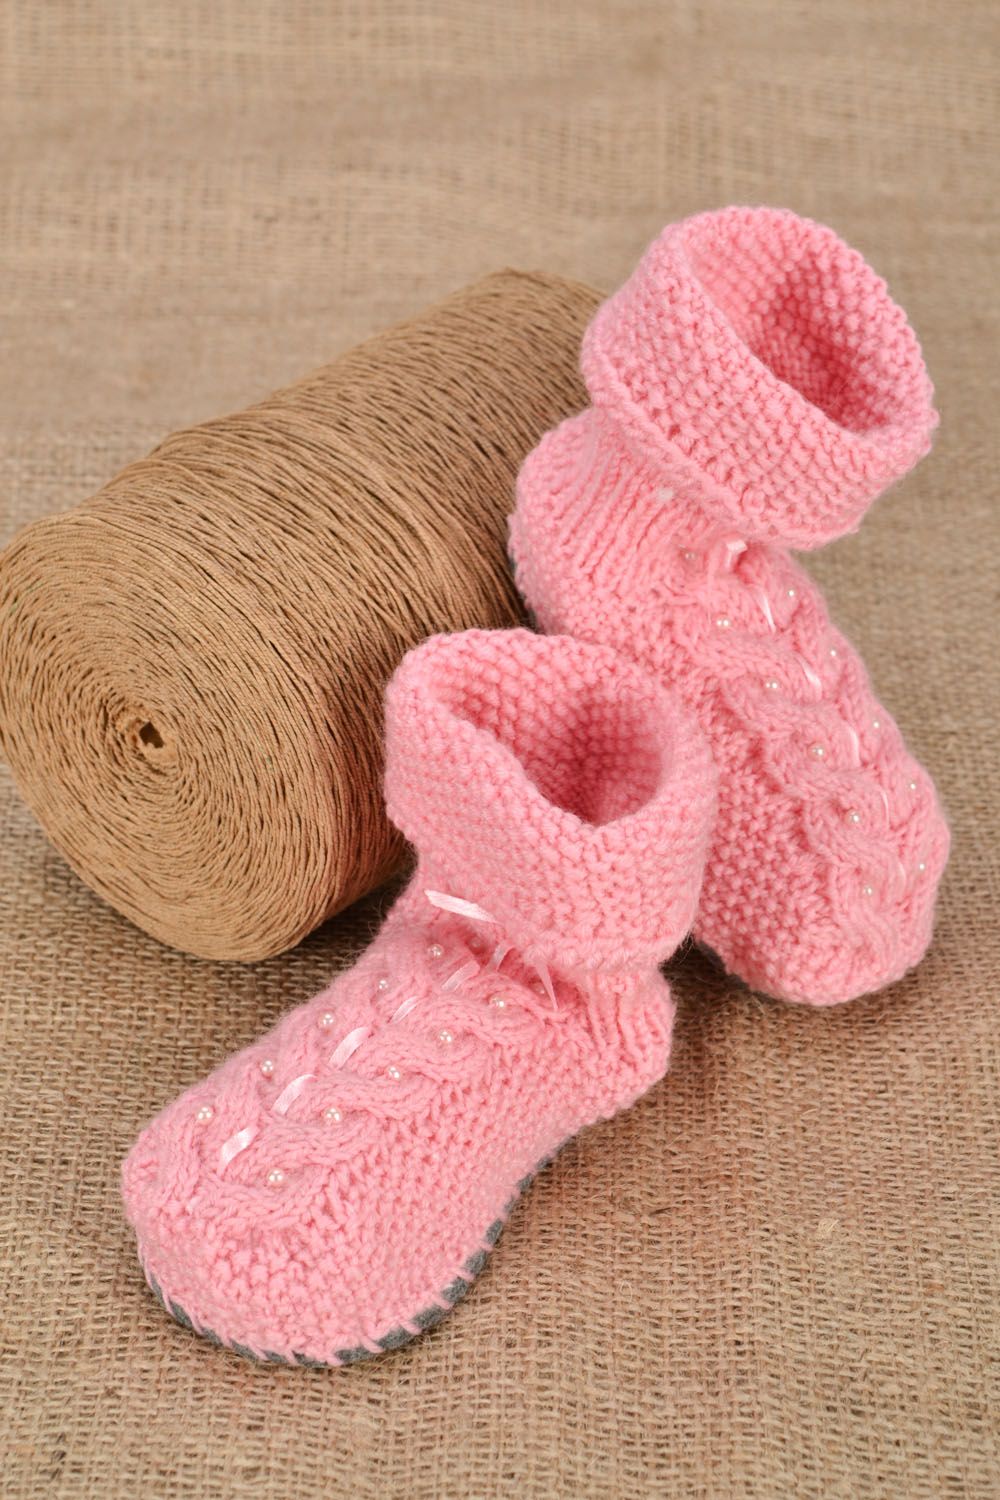 Crochet baby shoes photo 1